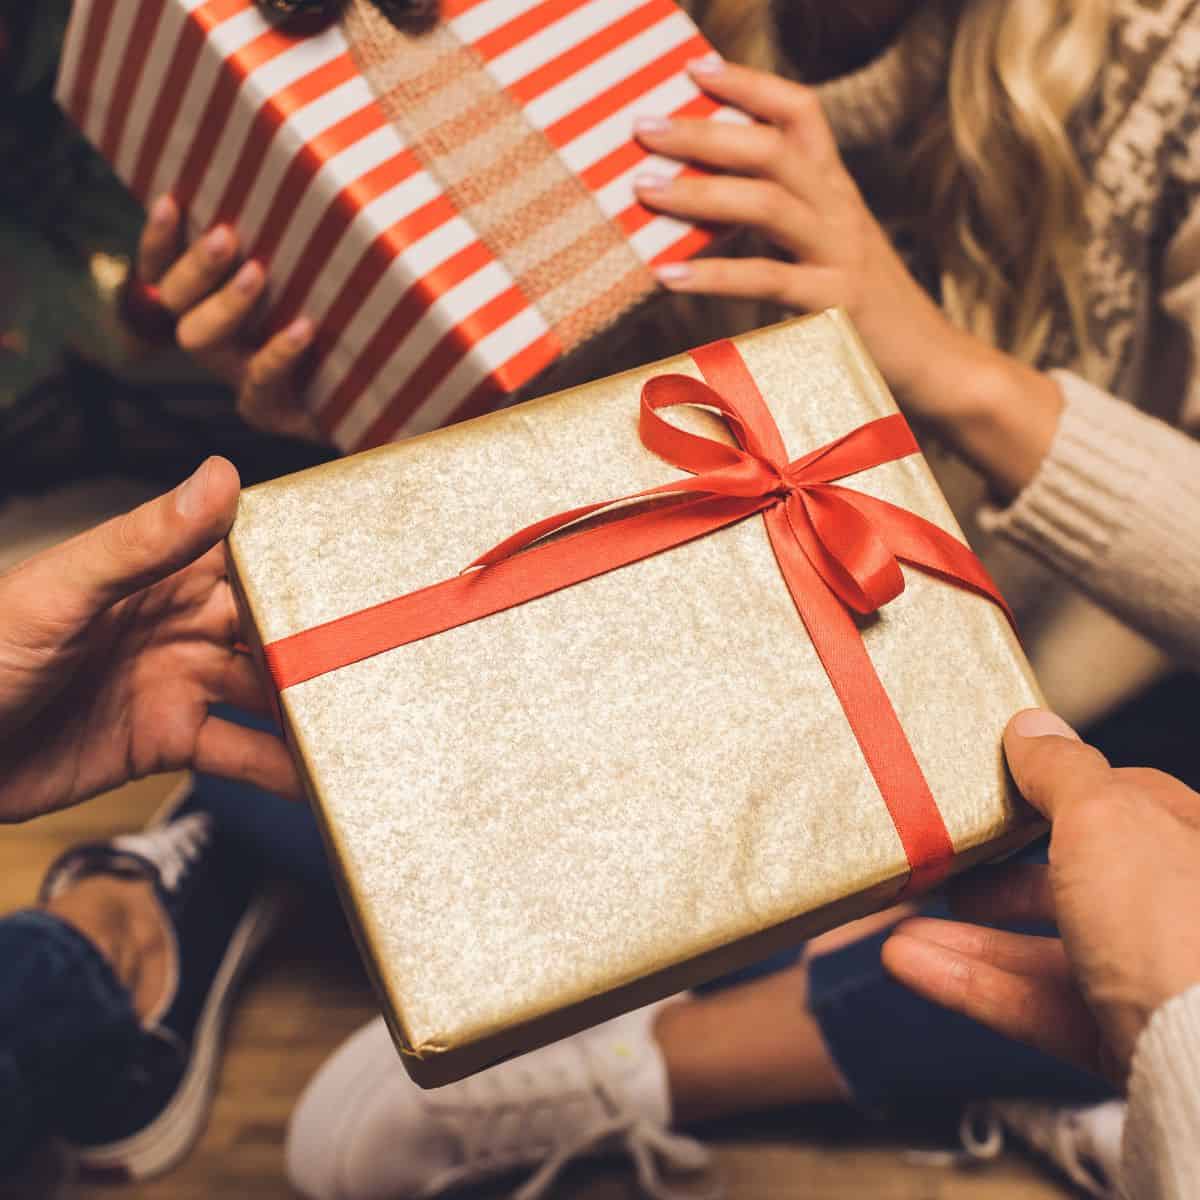 gifts being exchanged at a party